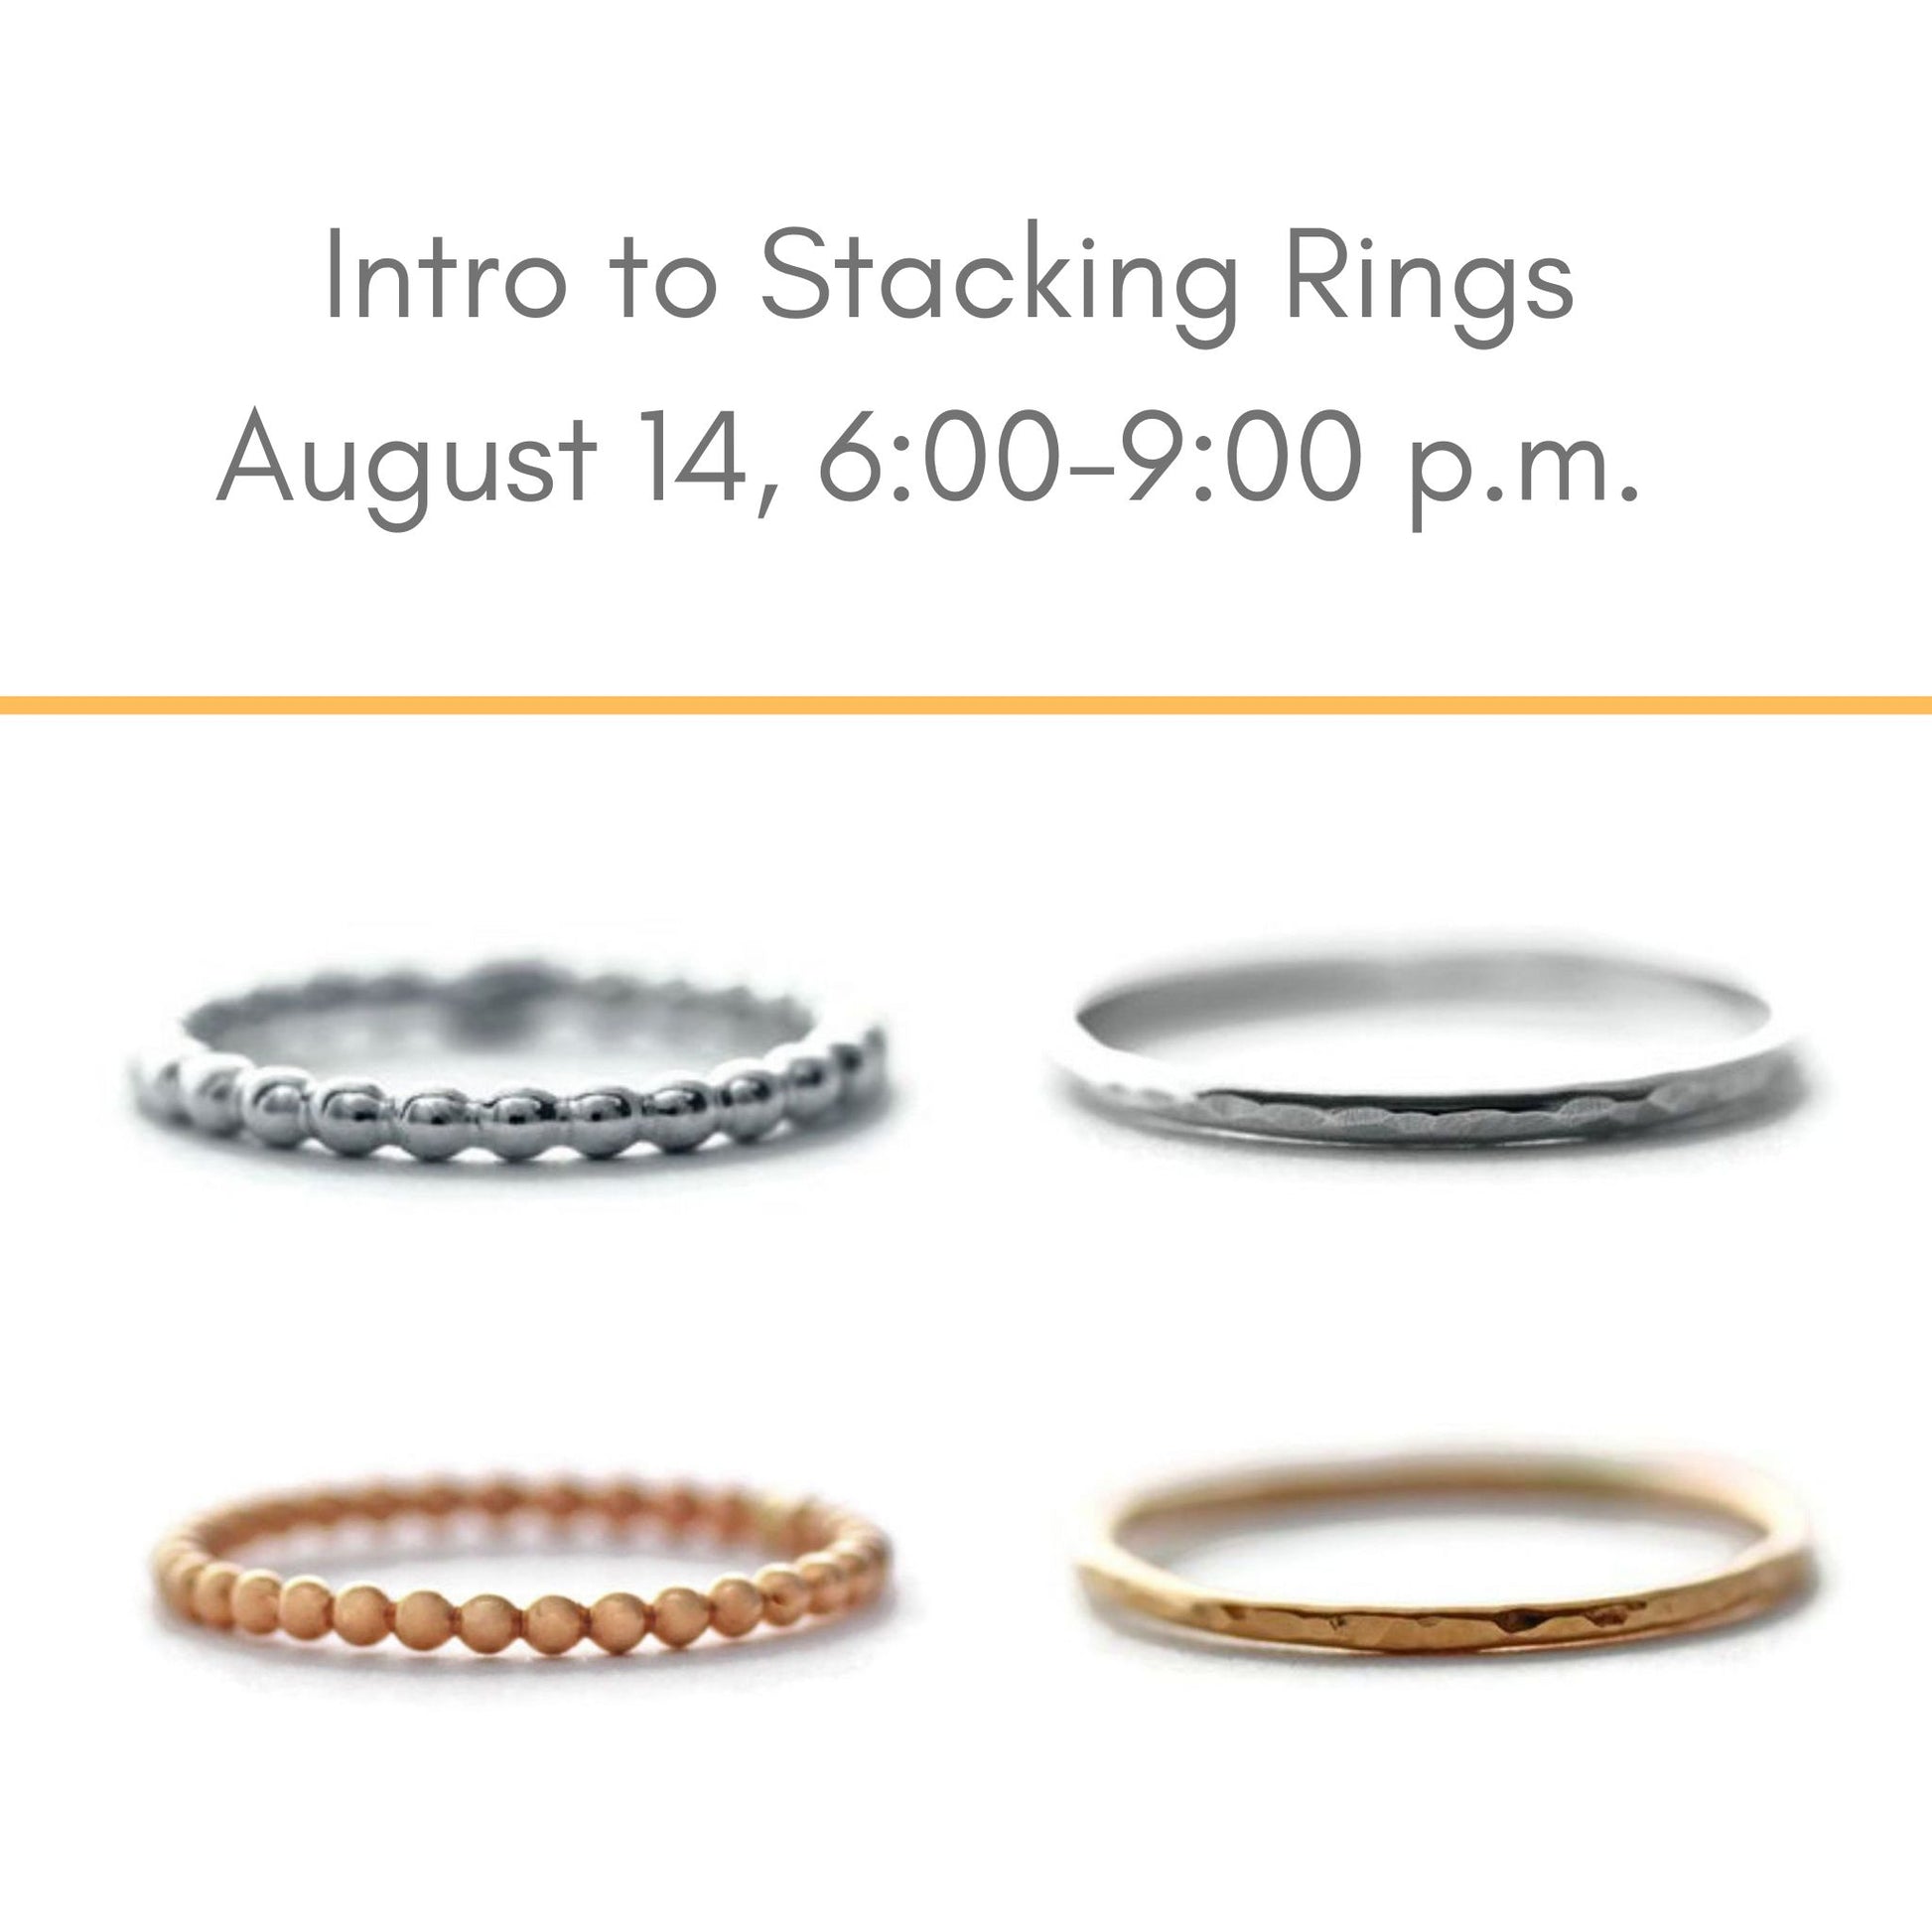 Intro to Stacking Rings August 14 at Silver Peak Studio